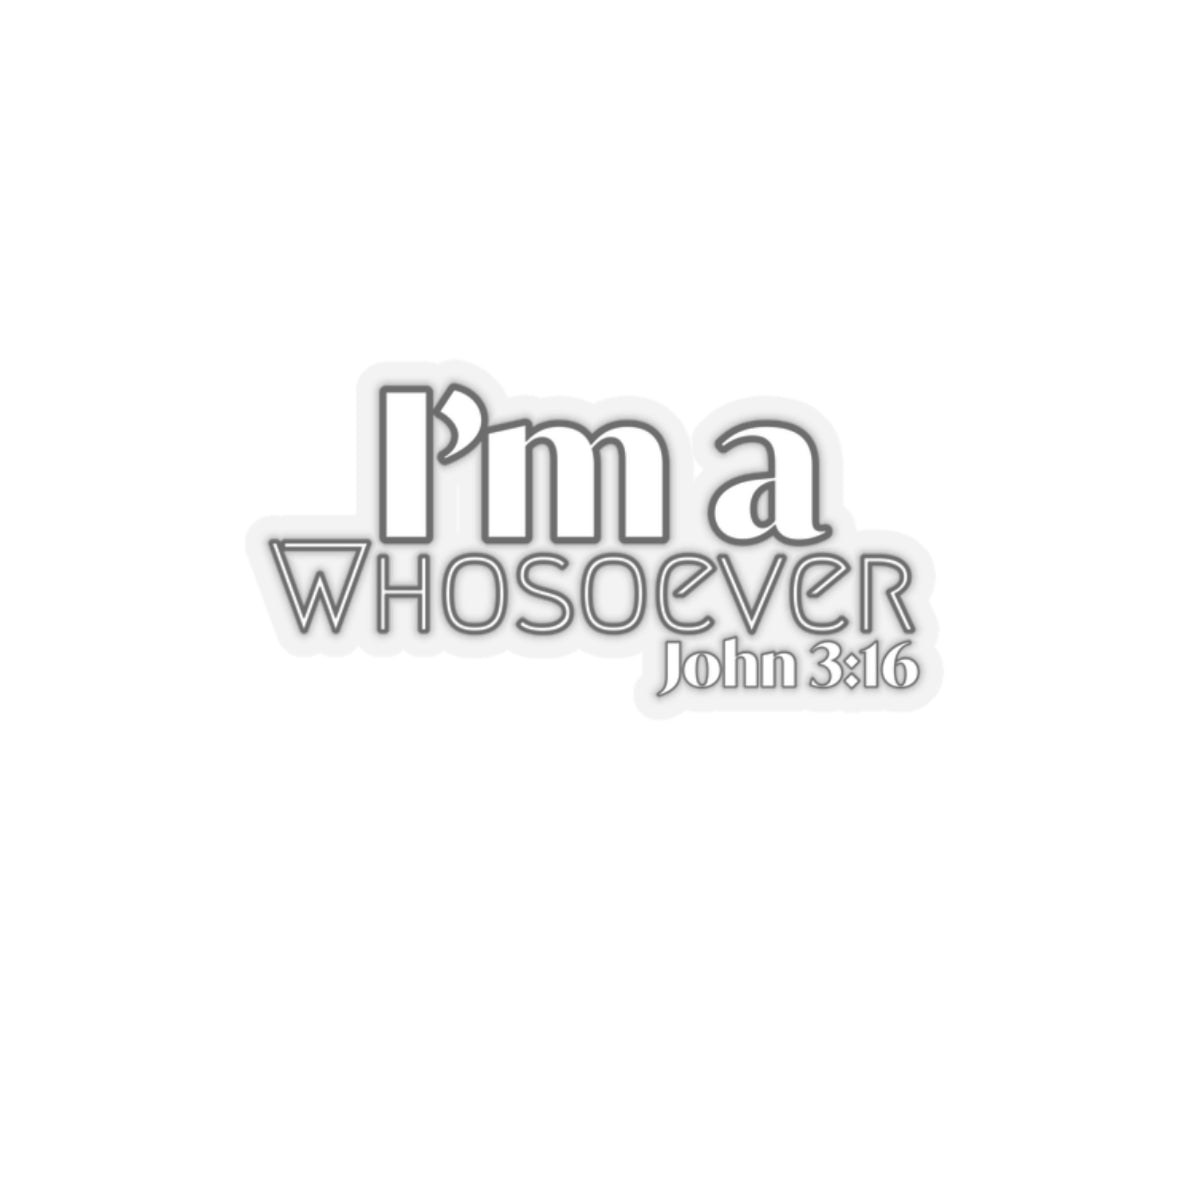 I’M A WHOSOEVER Decal/Sticker - The Bible Junkies®